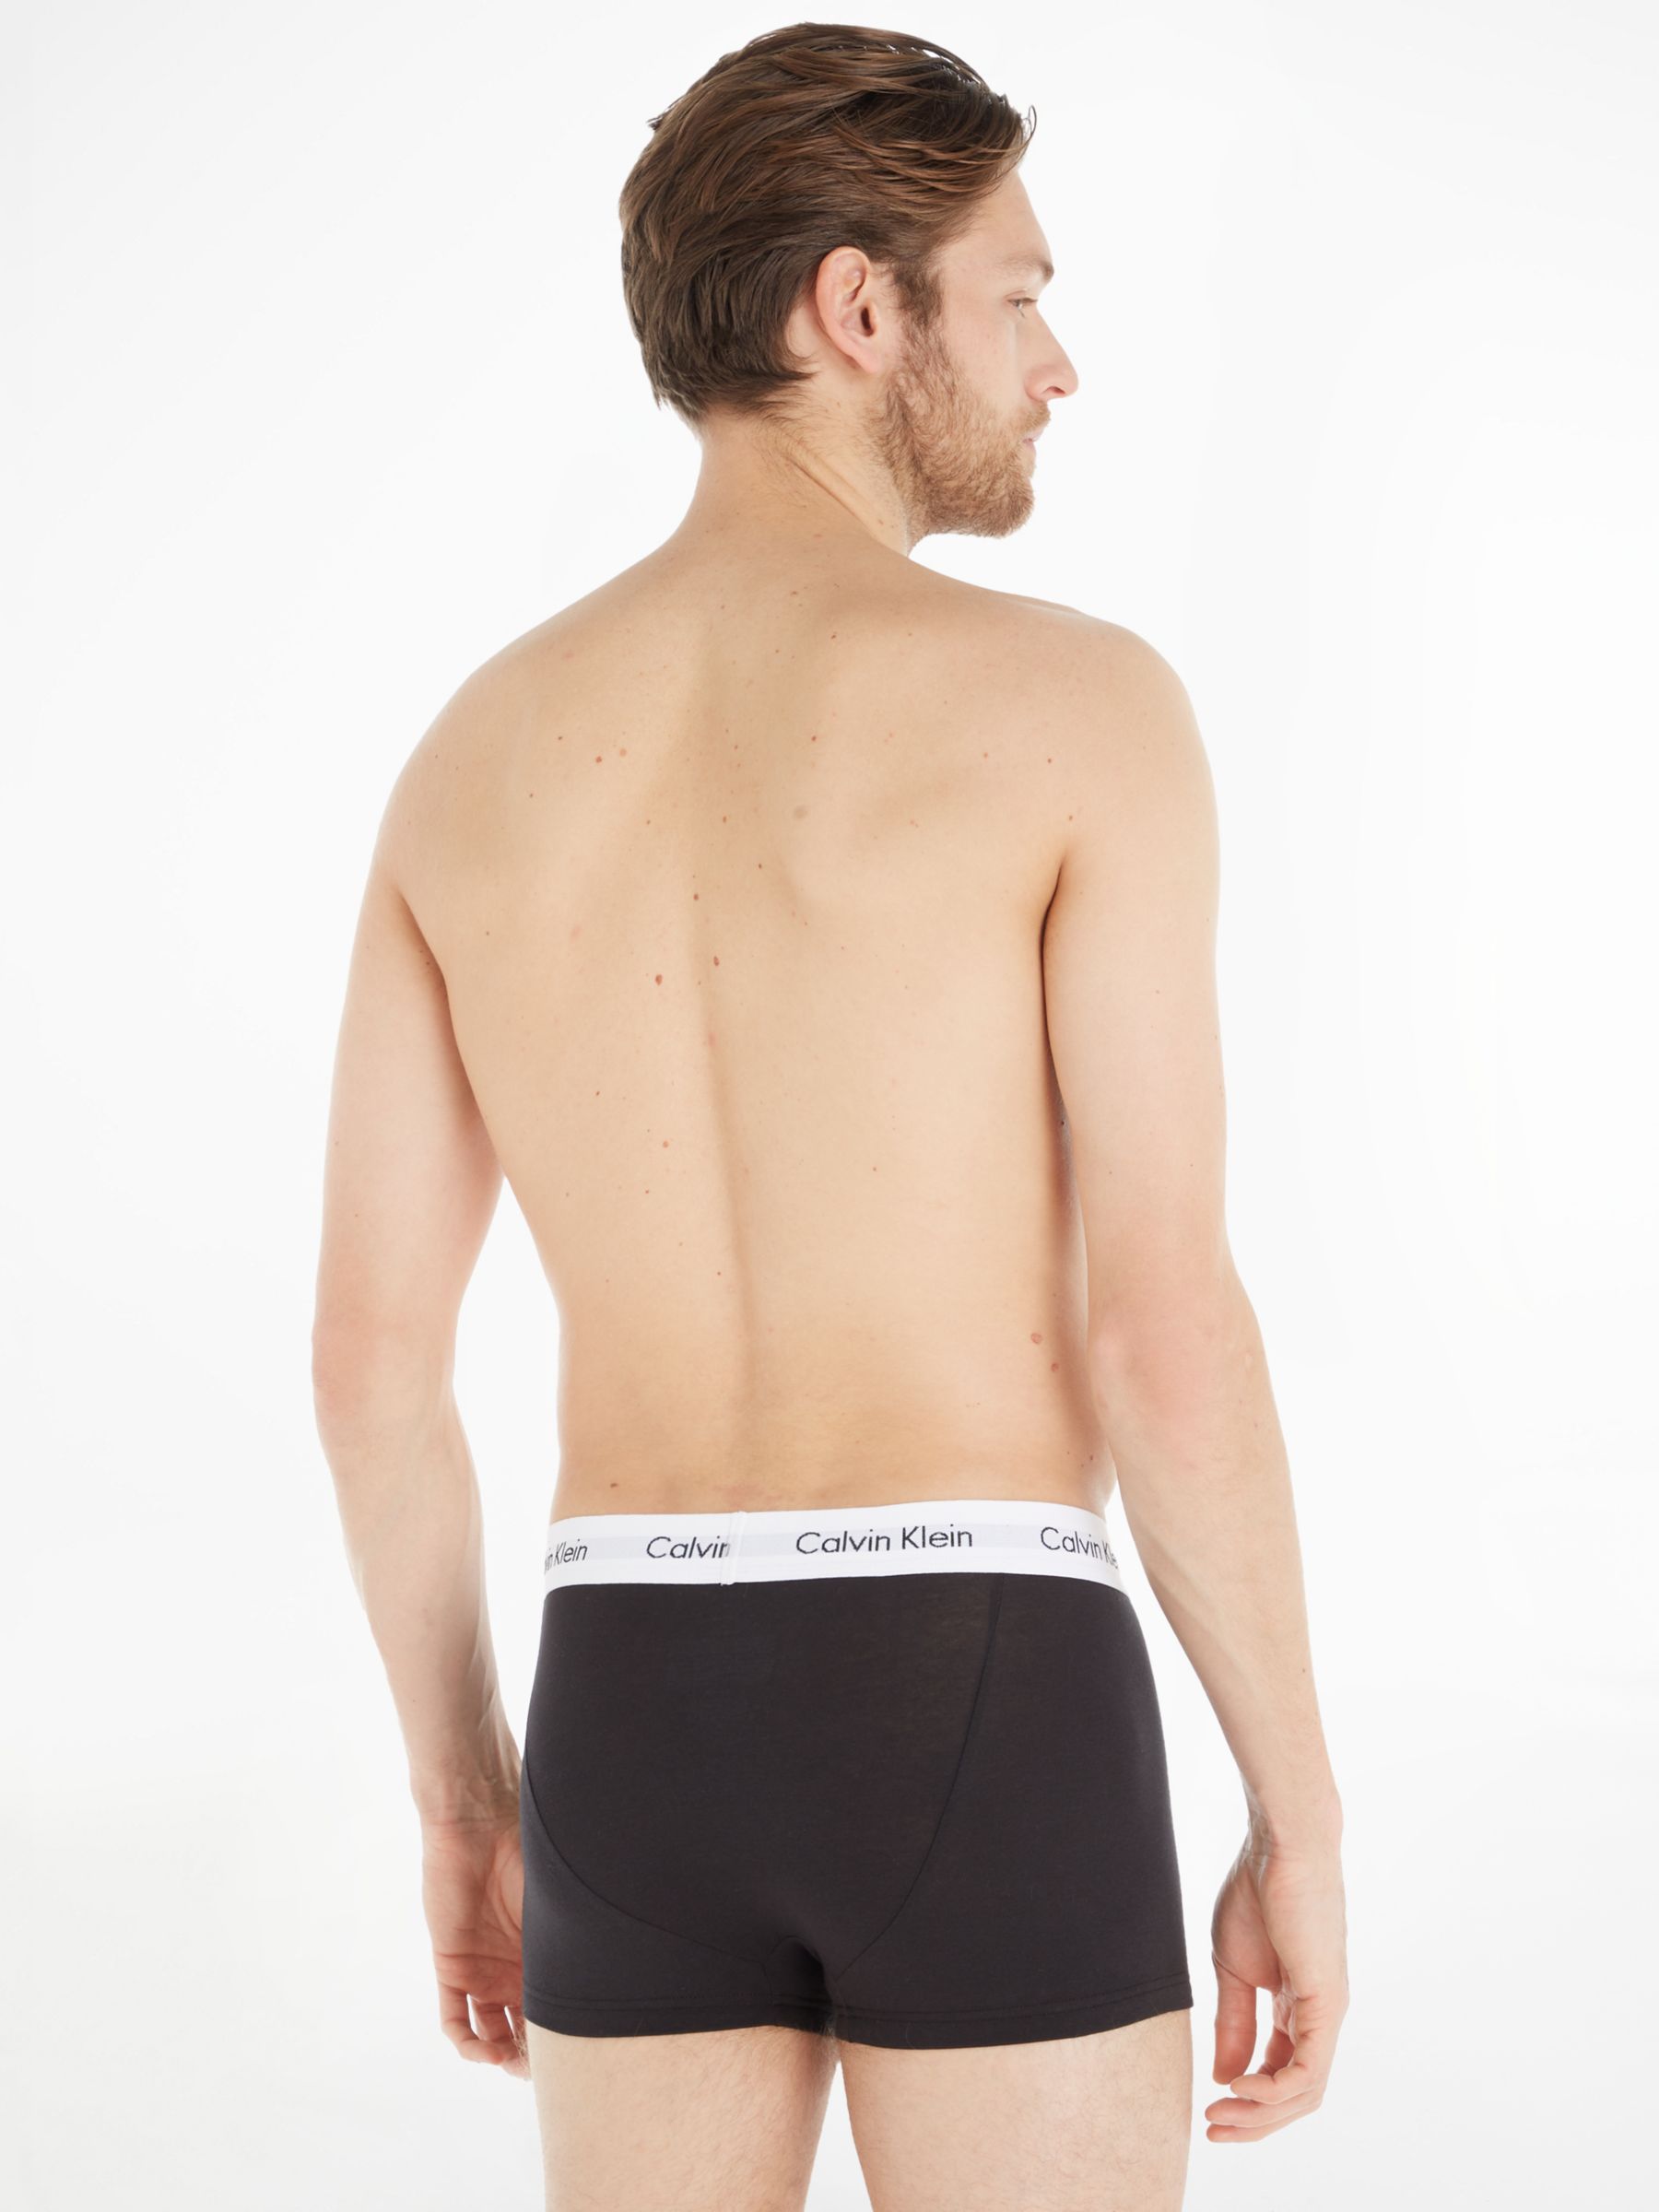 Calvin Klein Low Rise Cotton Stretch Trunks, Pack of 3, Black/White/Grey  Heather at John Lewis & Partners